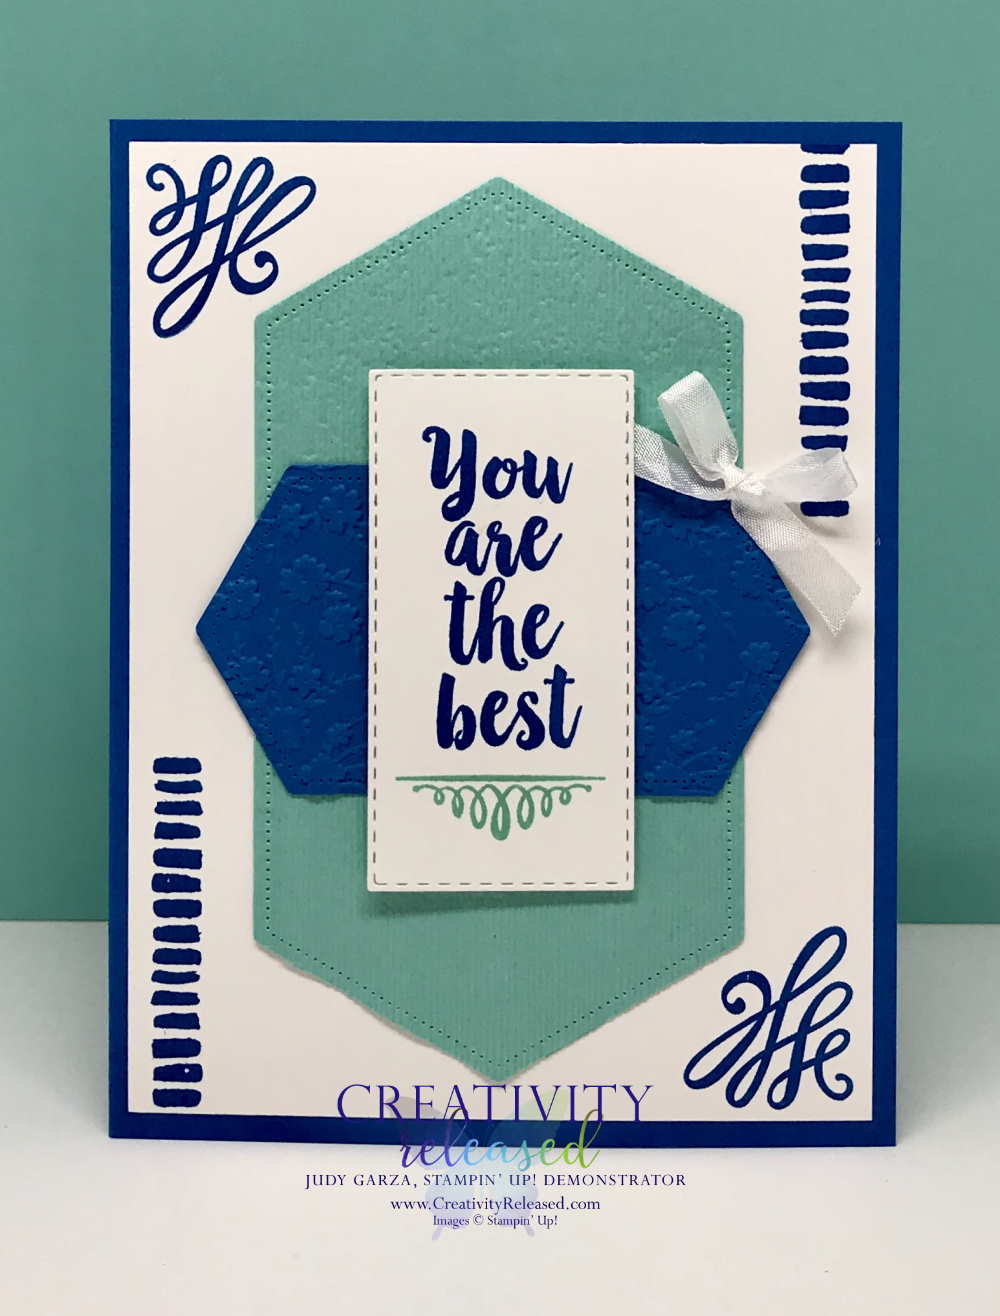 'You Are The Best" greeting card made in blue colors with the A Big Thank You stamp set by Stampin' Up!